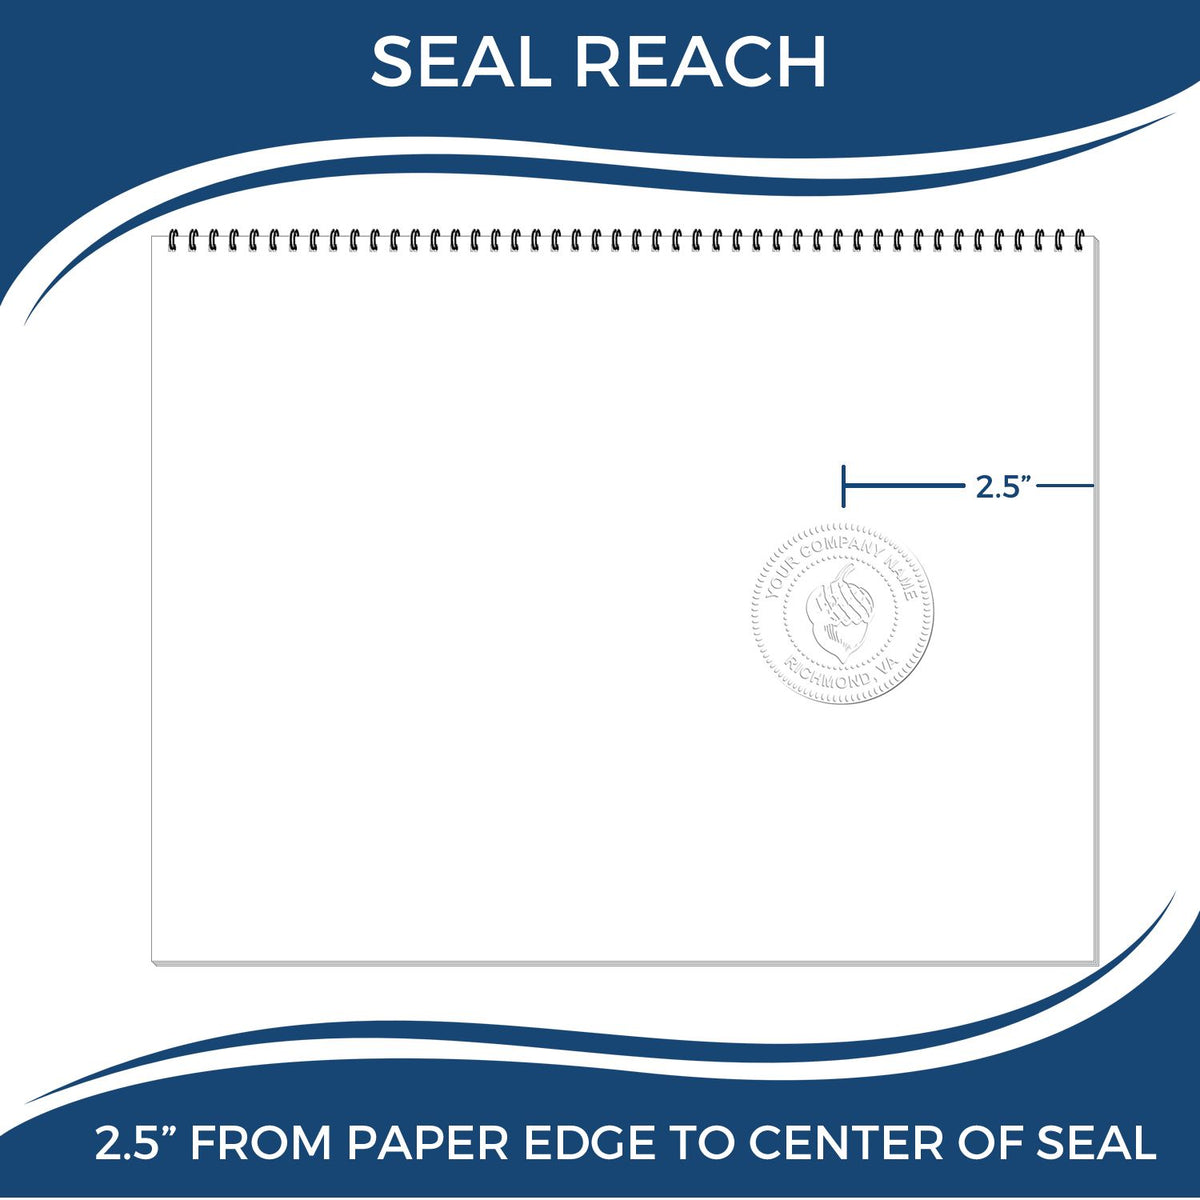 An infographic showing the seal reach which is represented by a ruler and a miniature seal image of the Heavy Duty Cast Iron Texas Architect Embosser